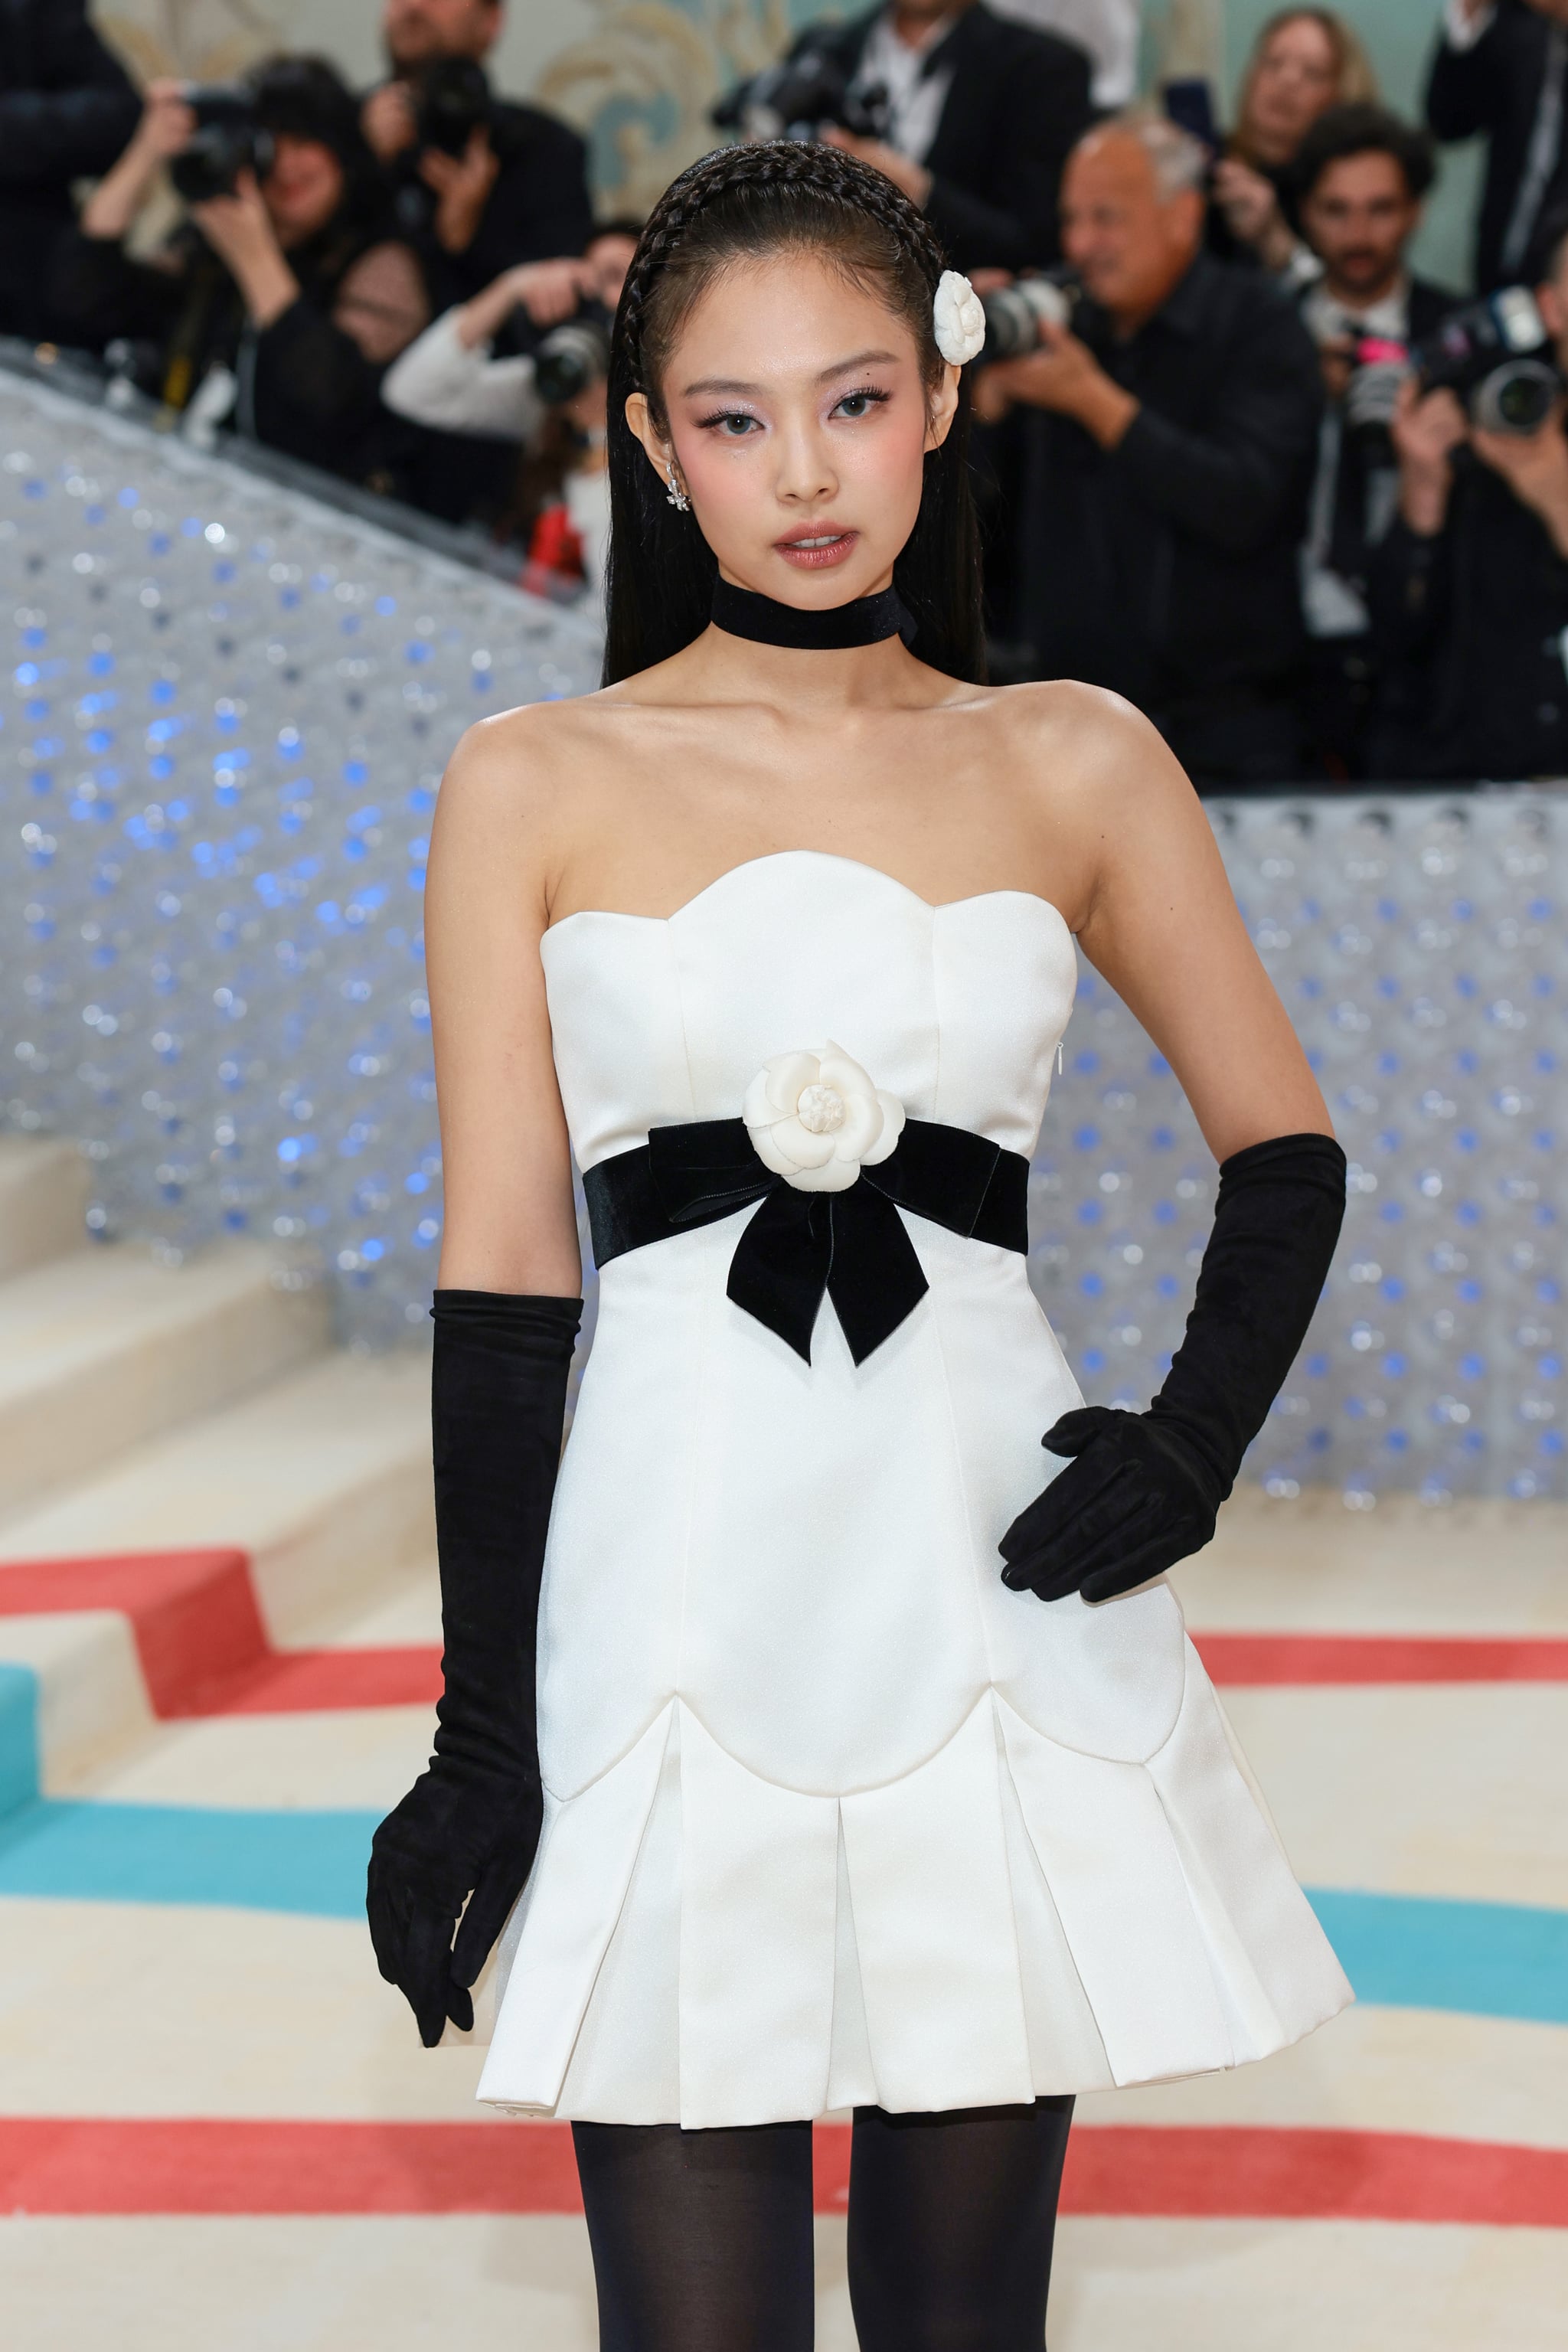 Fashion, Shopping & Style, Jennie Makes Her Met Gala Debut in a Vintage  Corset Dress From Before She Was Born